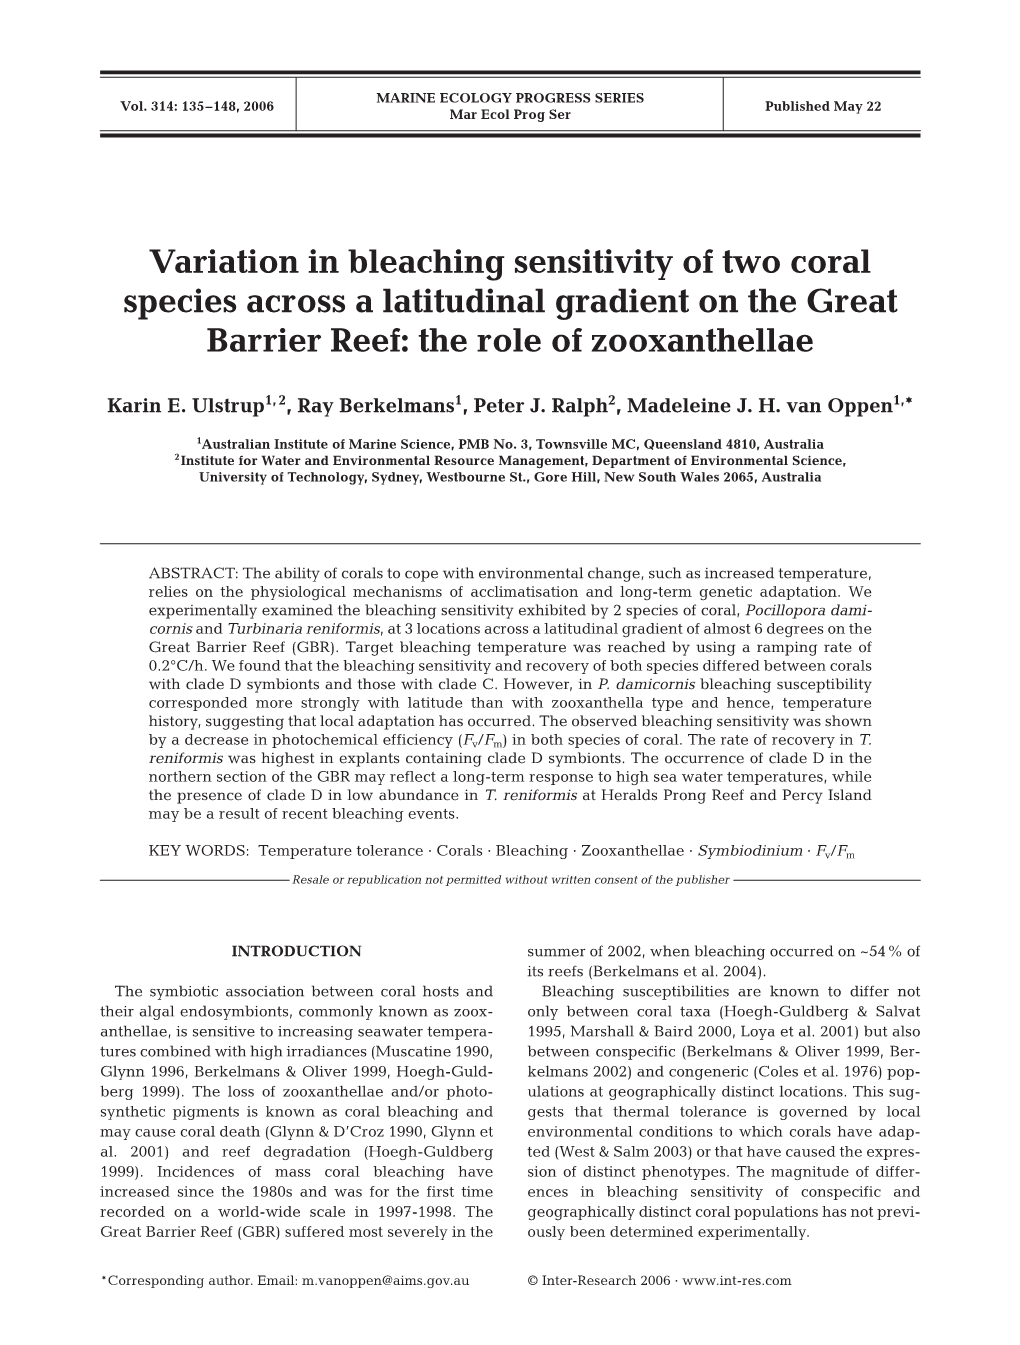 Variation in Bleaching Sensitivity of Two Coral Species Across a Latitudinal Gradient on the Great Barrier Reef: the Role of Zooxanthellae